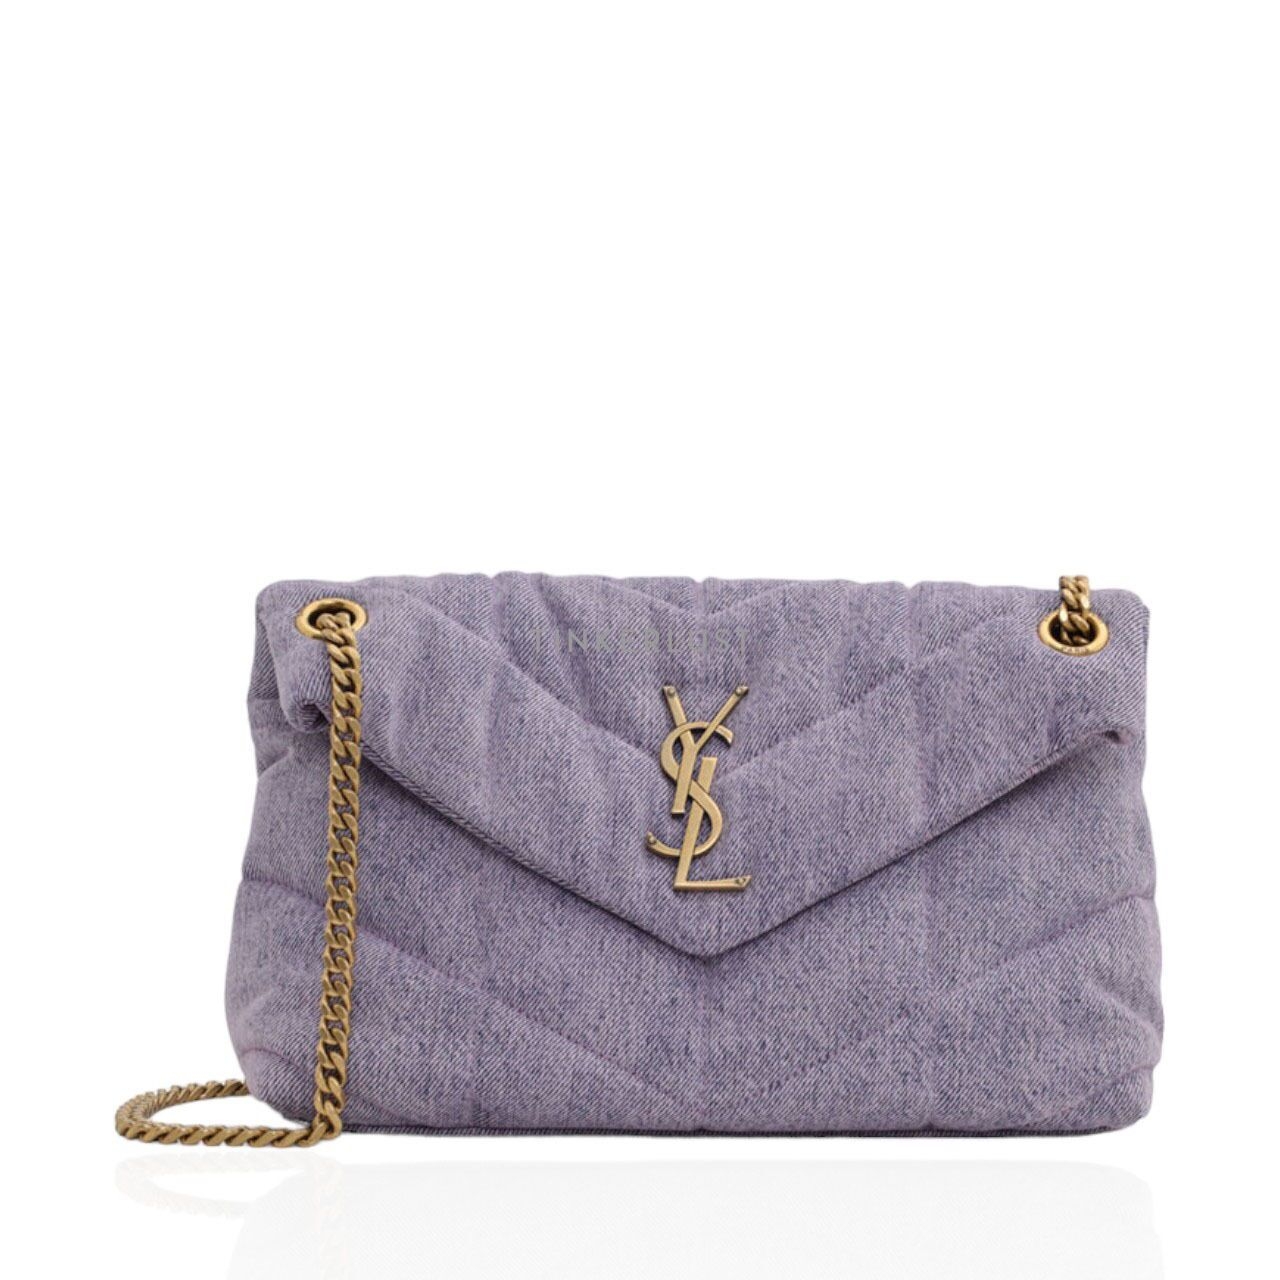 Saint Laurent Small Loulou Puffer in Bleached Lilac Denim x Smooth Leather with Bronze Shoulder Bag